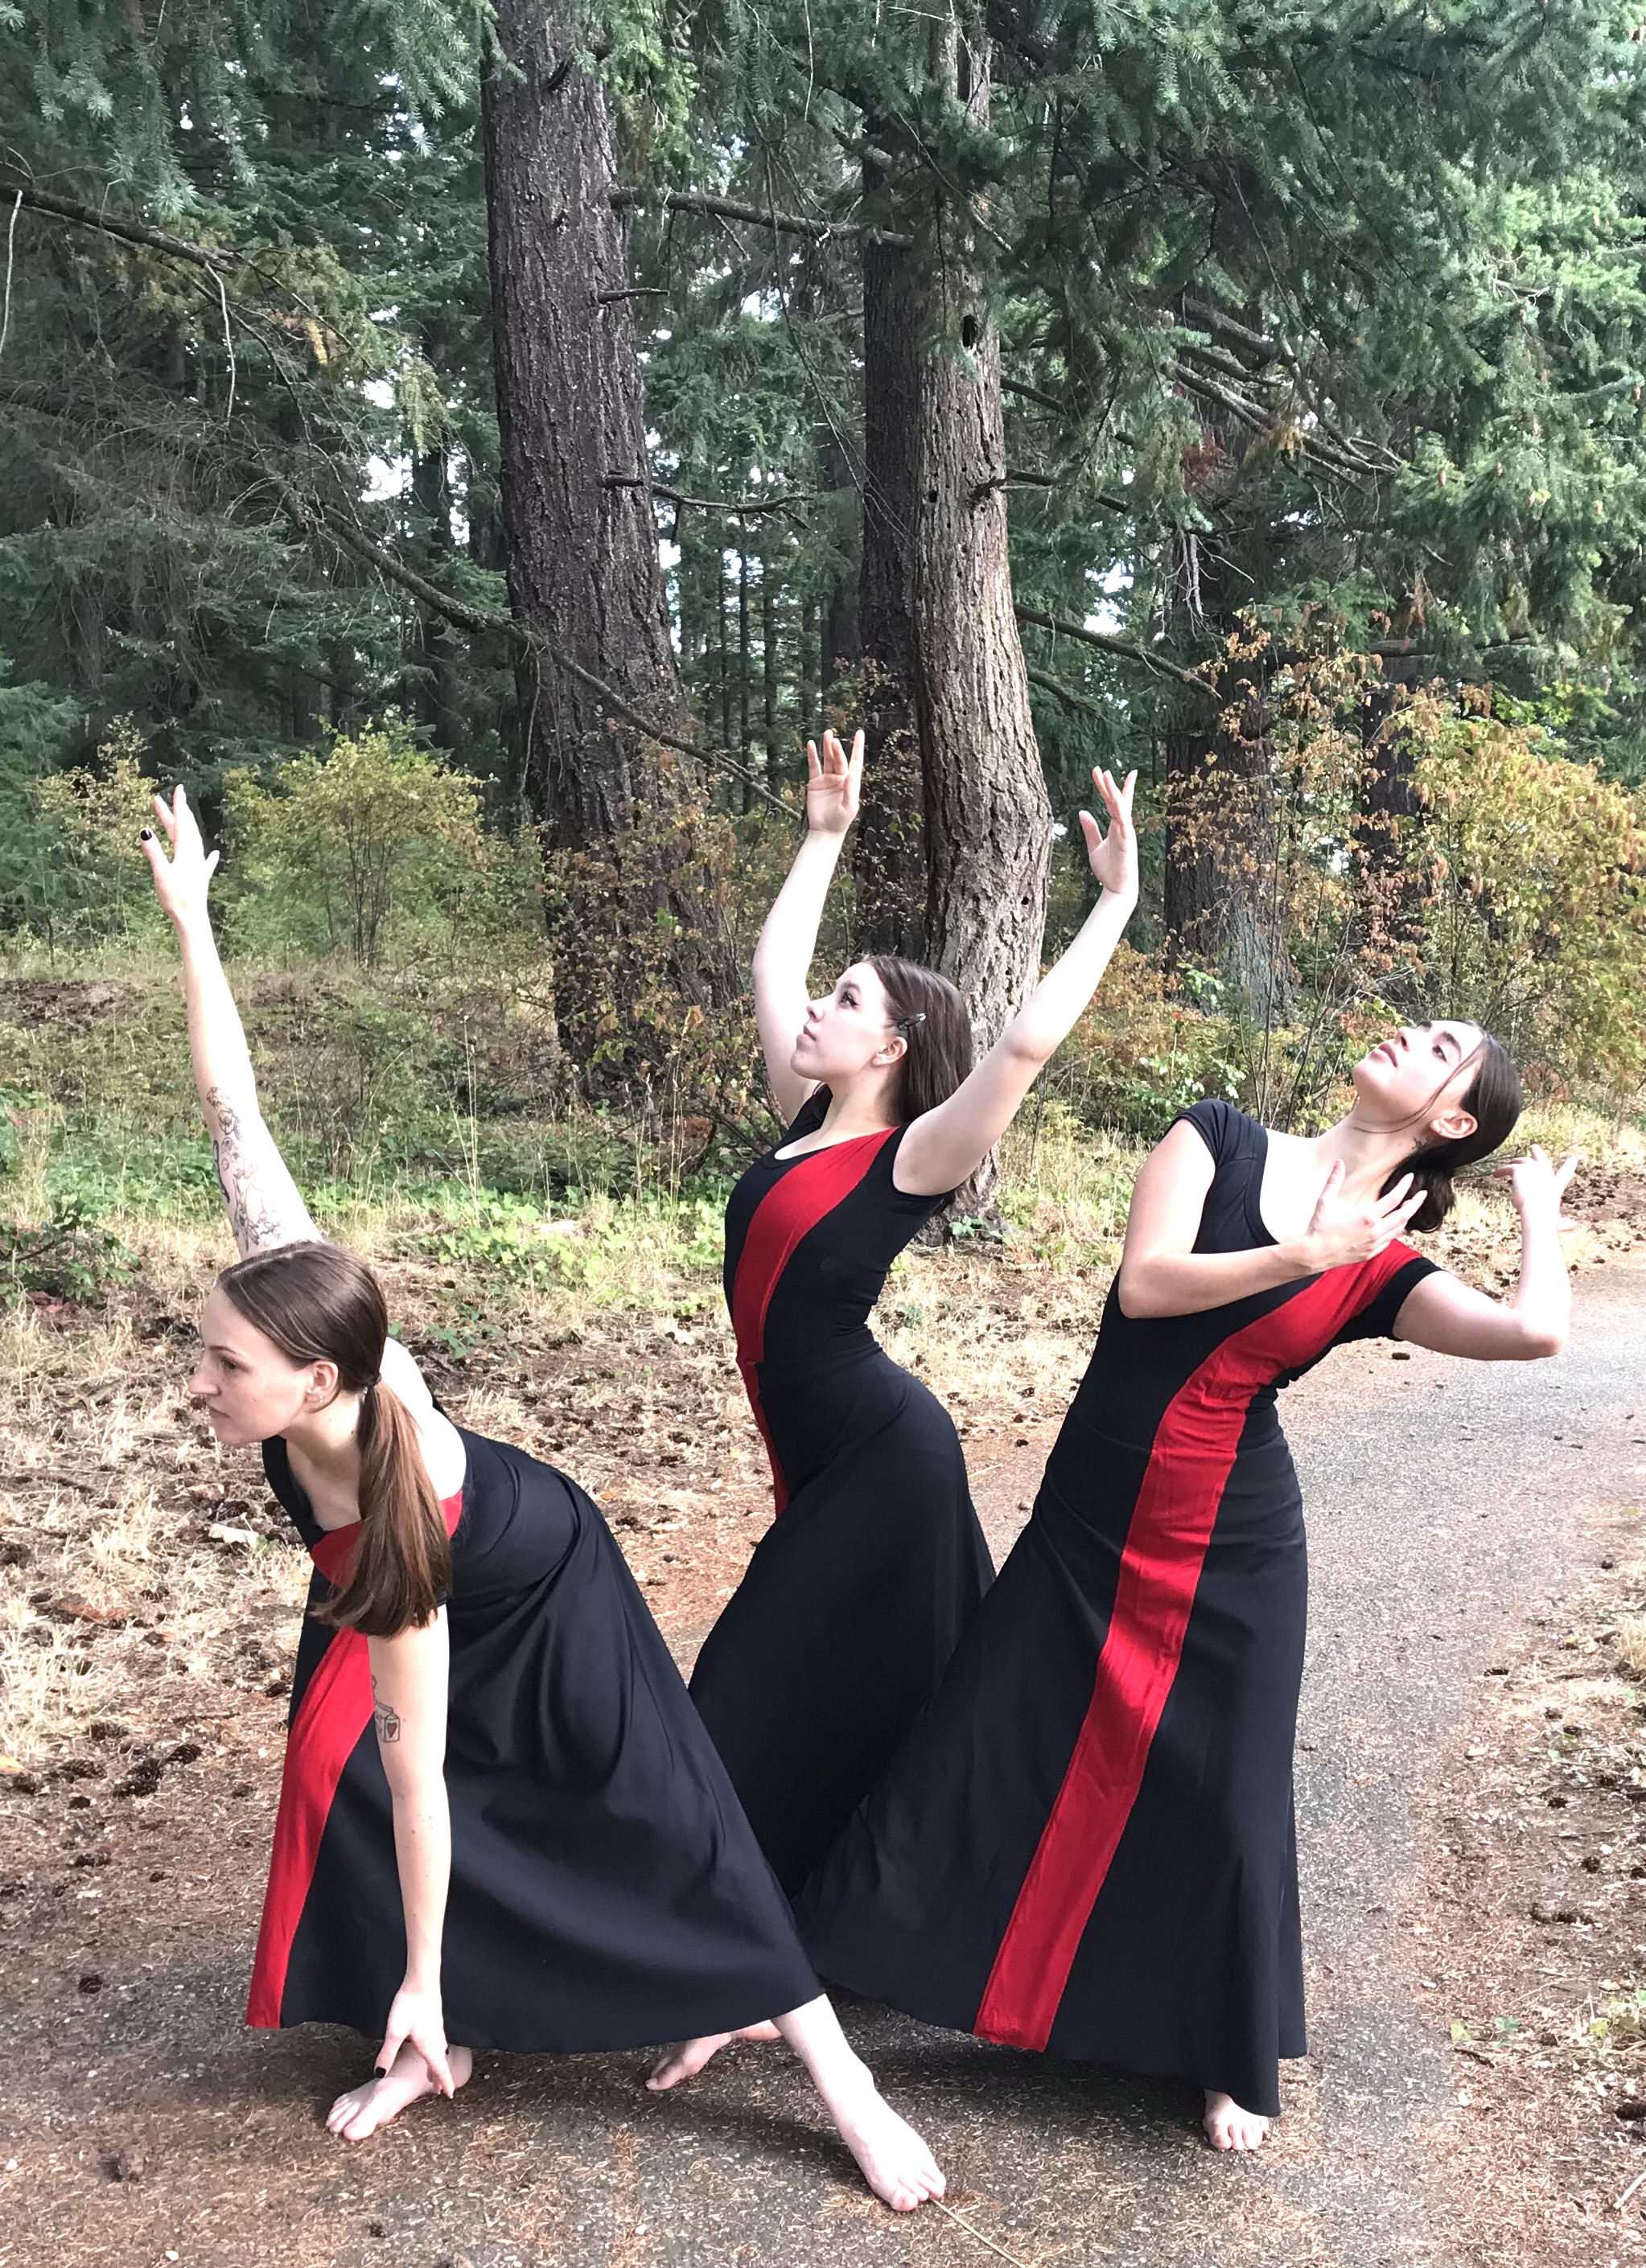 Three dancers in matching dresses strike unique poses together in the woods